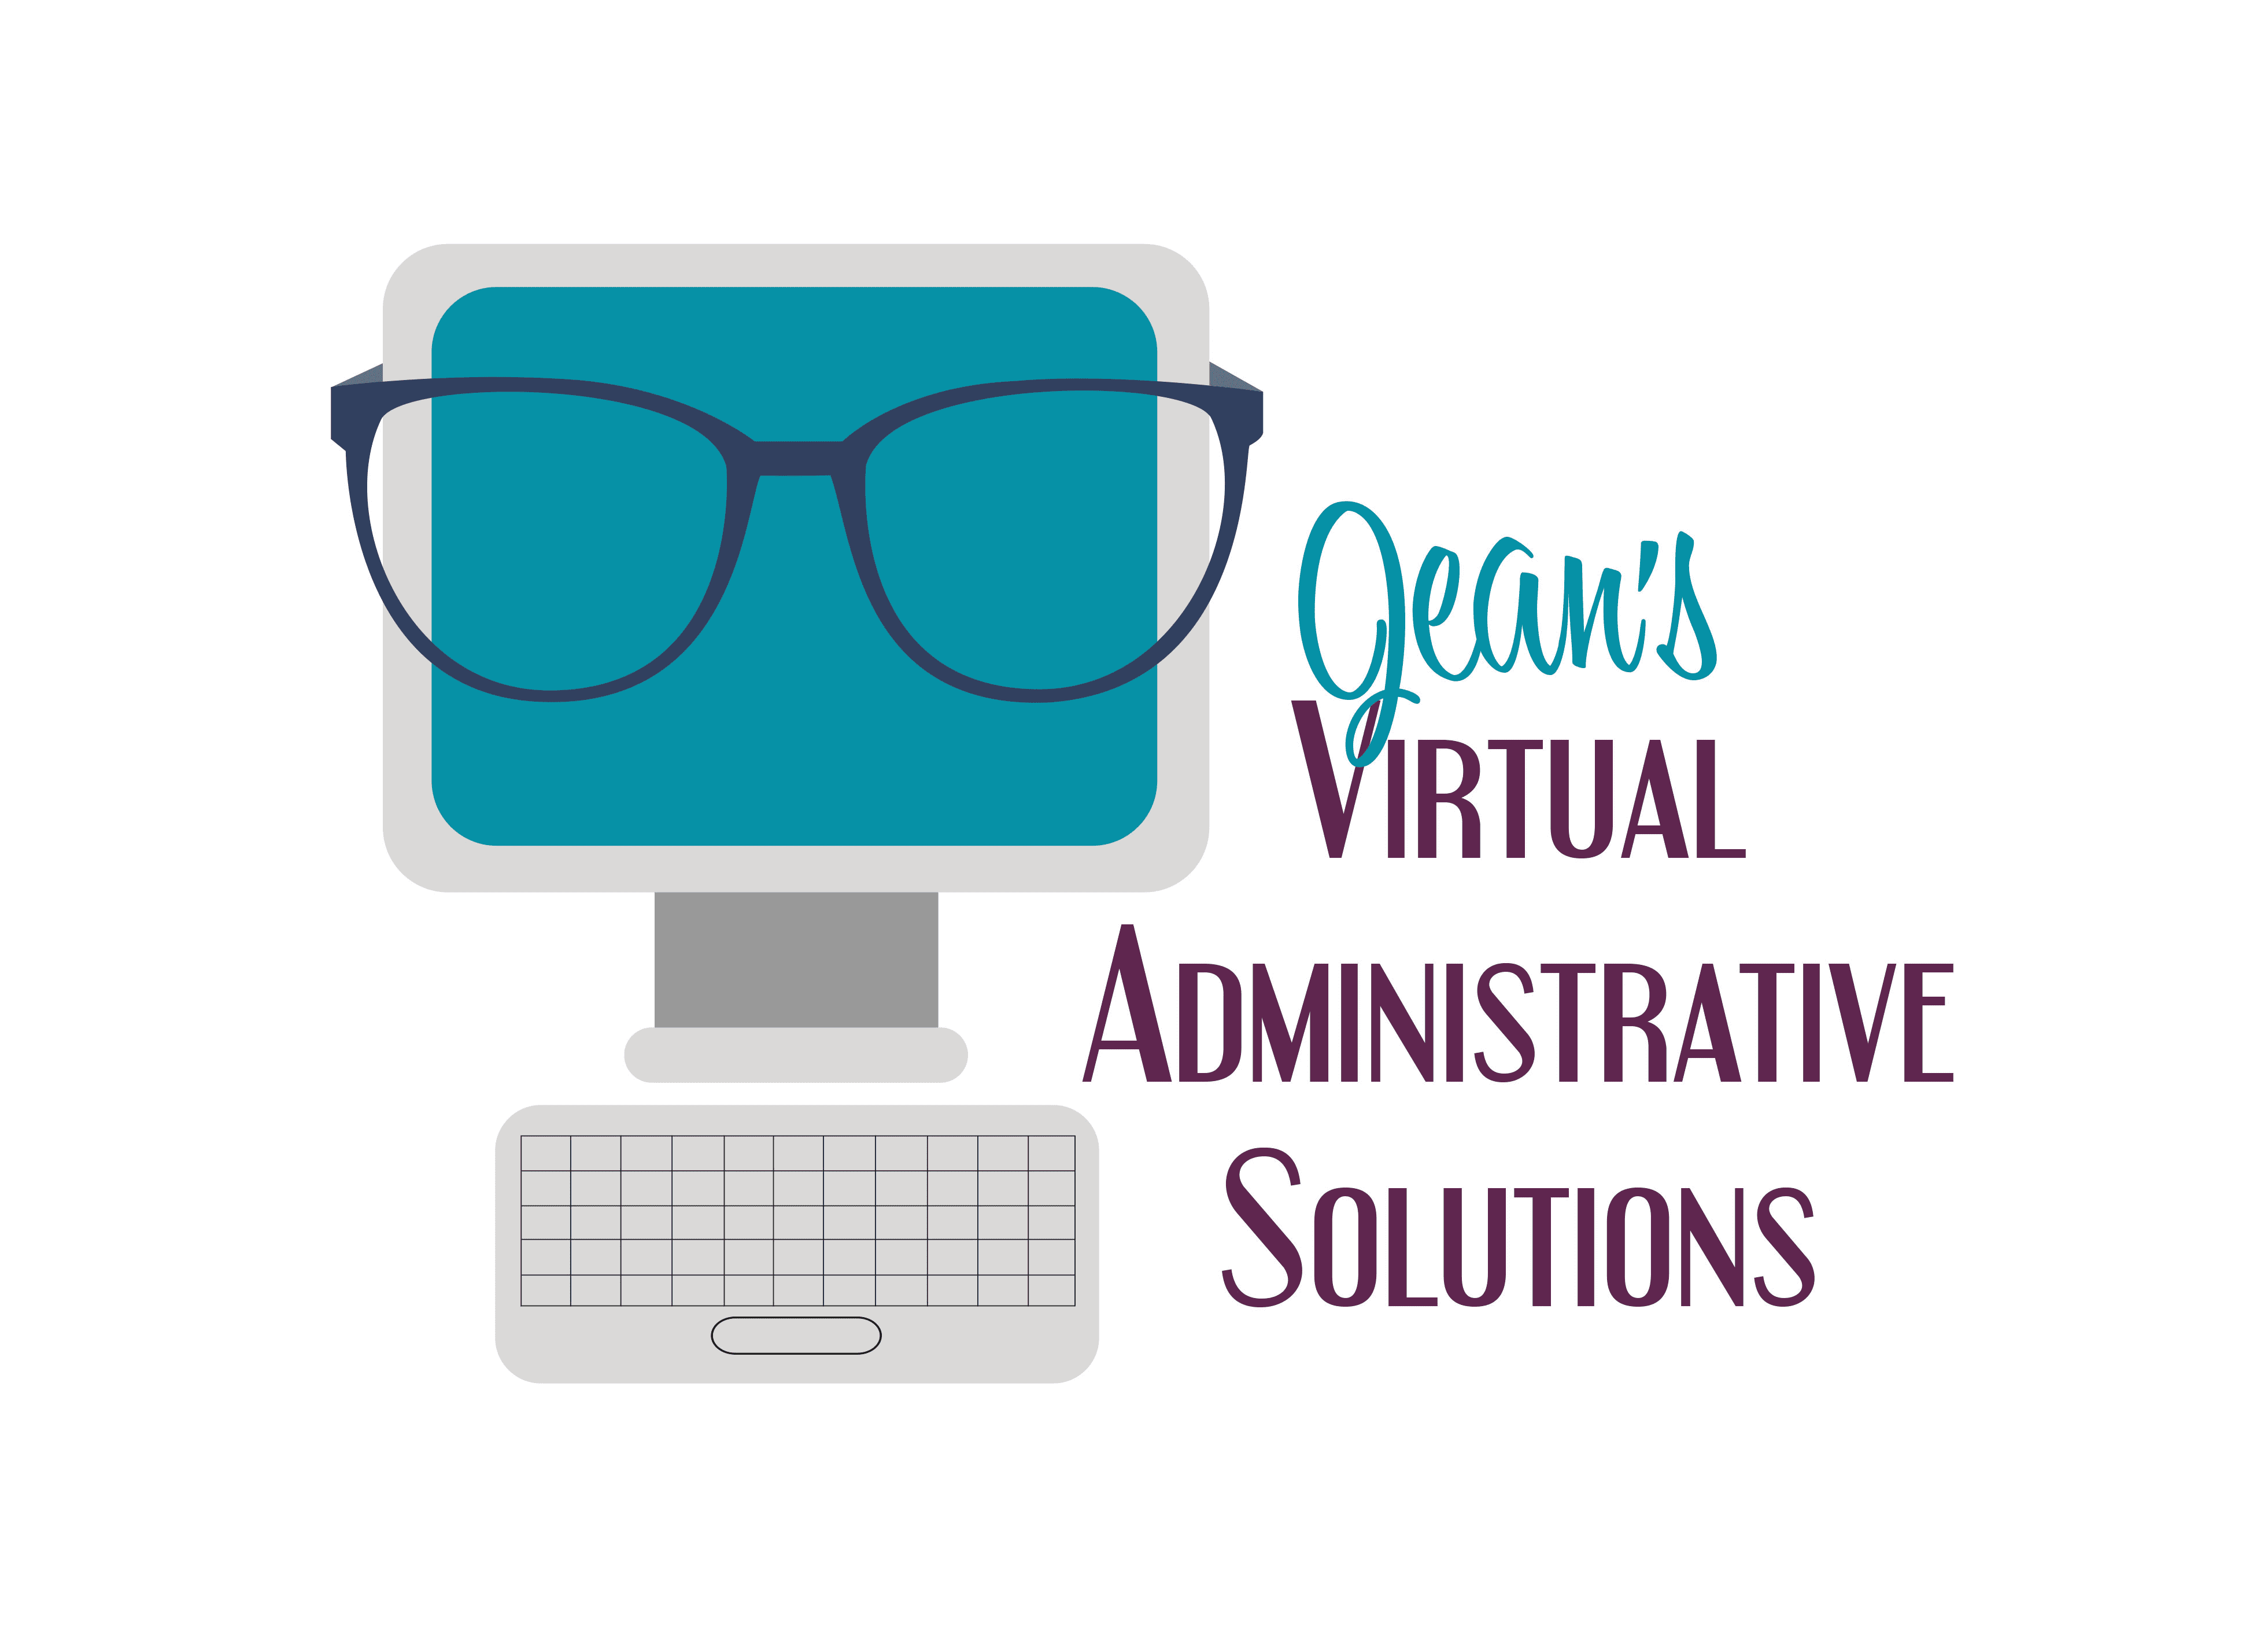 Jean's Virtual Administrative Solutions